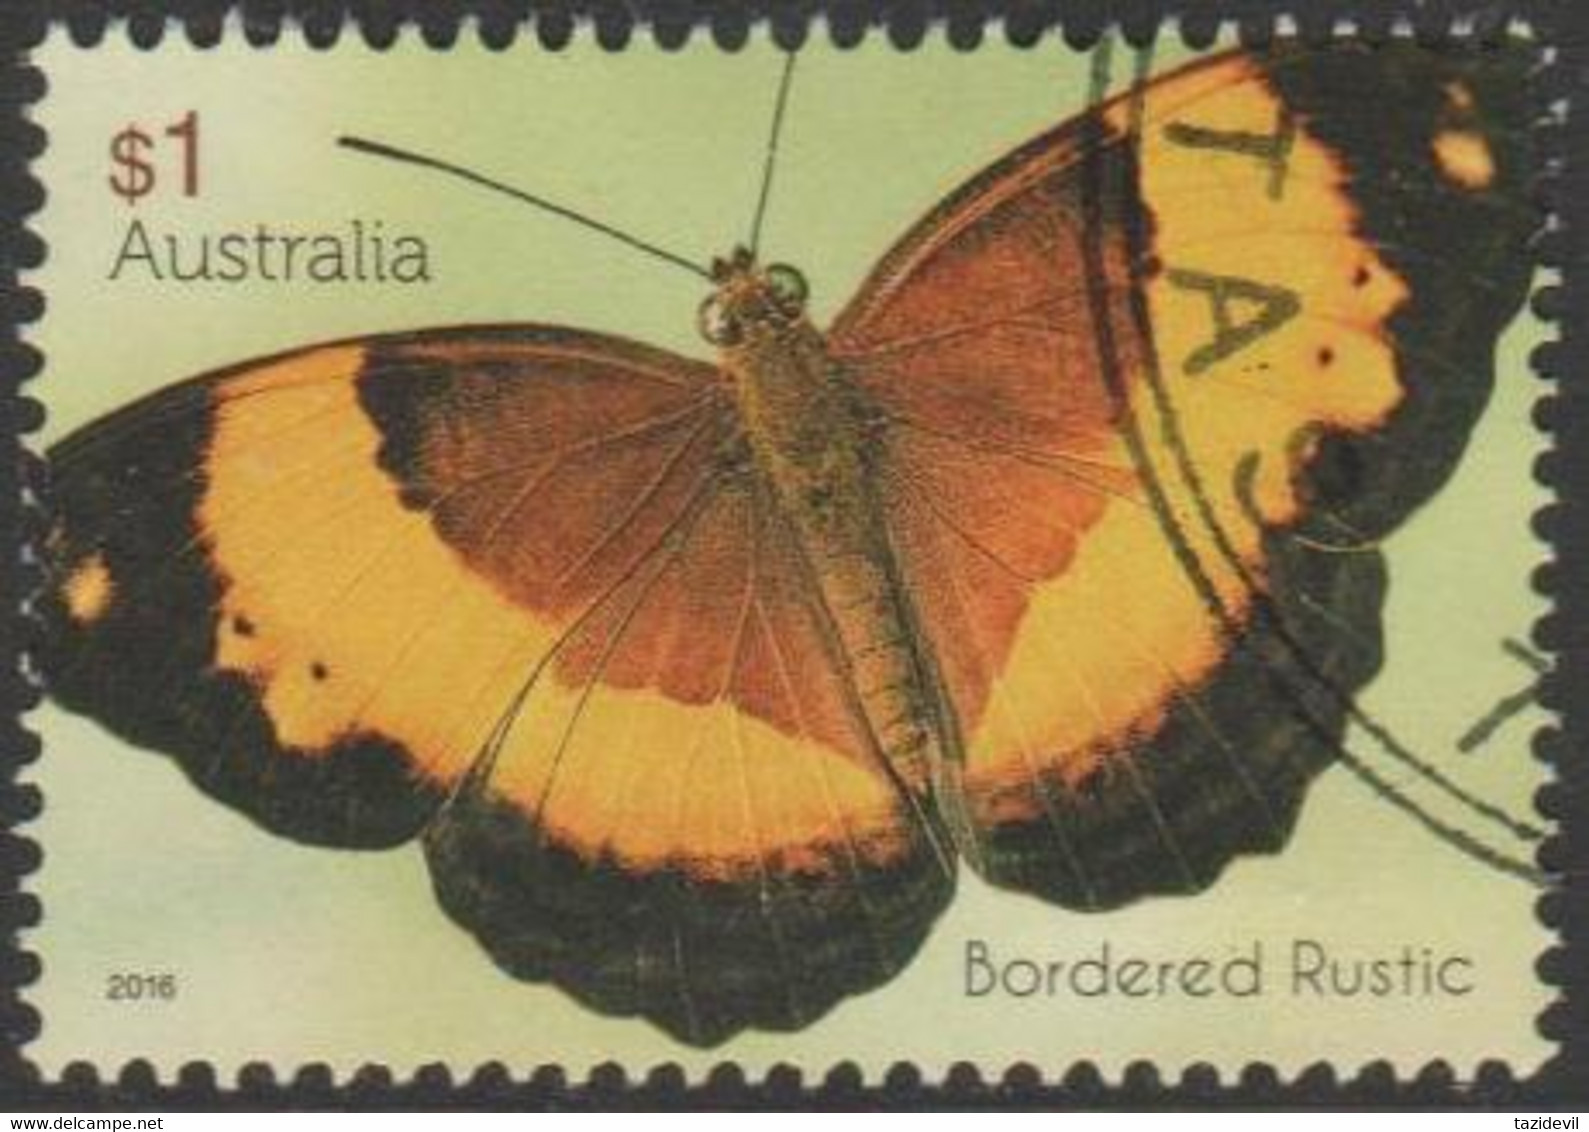 AUSTRALIA - USED 2016 $1.00 Butterflies - Bordered Rustic - Used Stamps